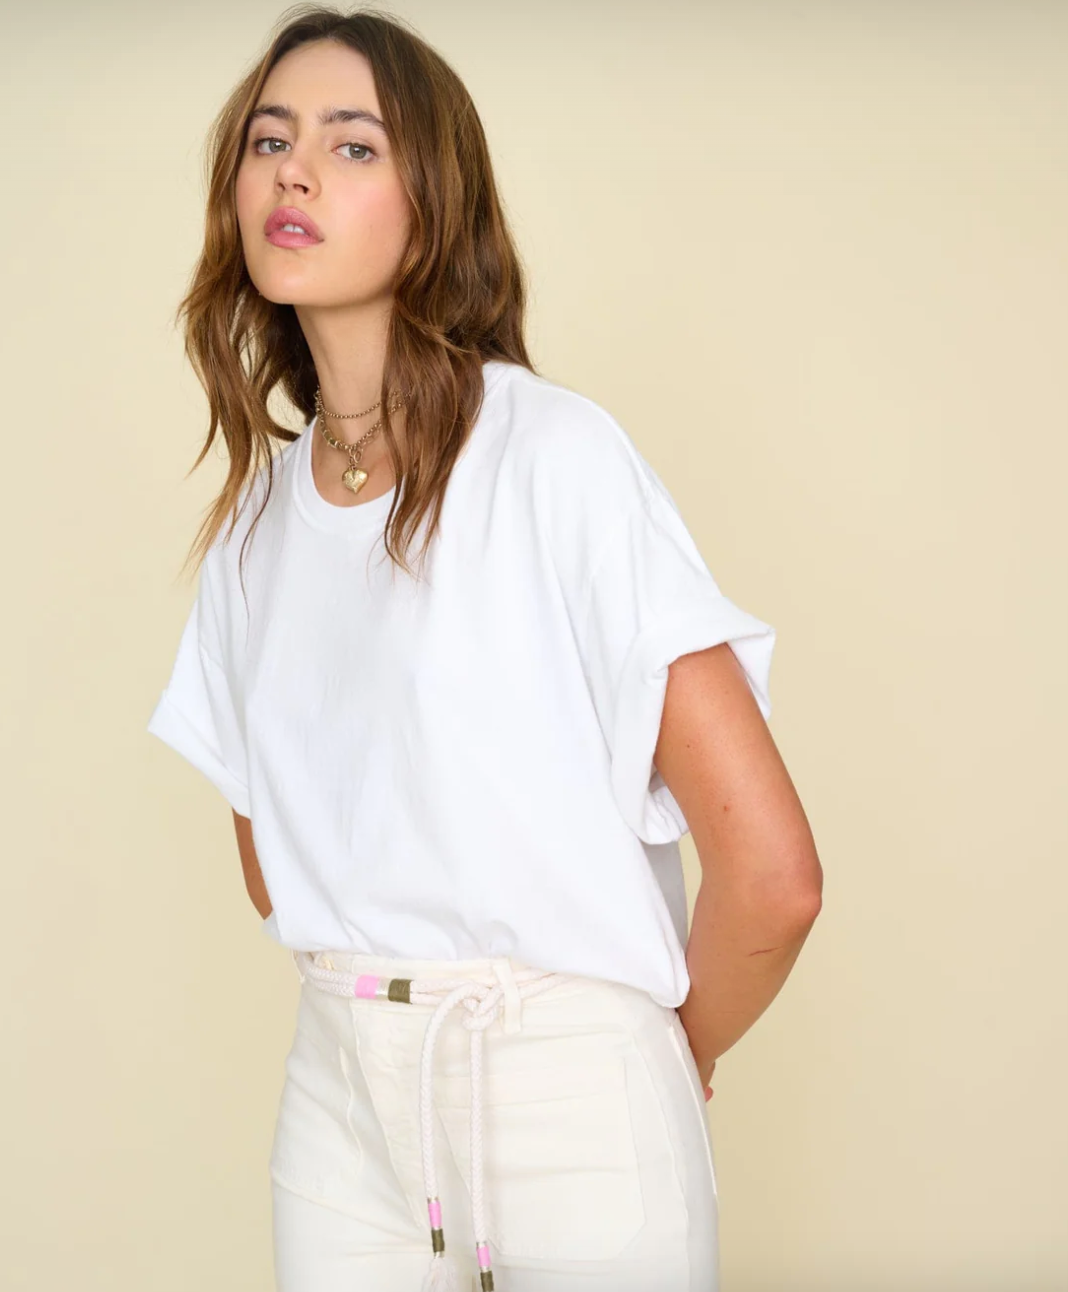 A person with long, wavy brown hair stands against a beige background, looking at the camera. They are wearing a Xirena White Palmer Tee and high-waisted white pants, with a decorative belt featuring beads and rope. With a relaxed, casual demeanor reminiscent of Scottsdale, Arizona bungalows, they exude effortless charm.